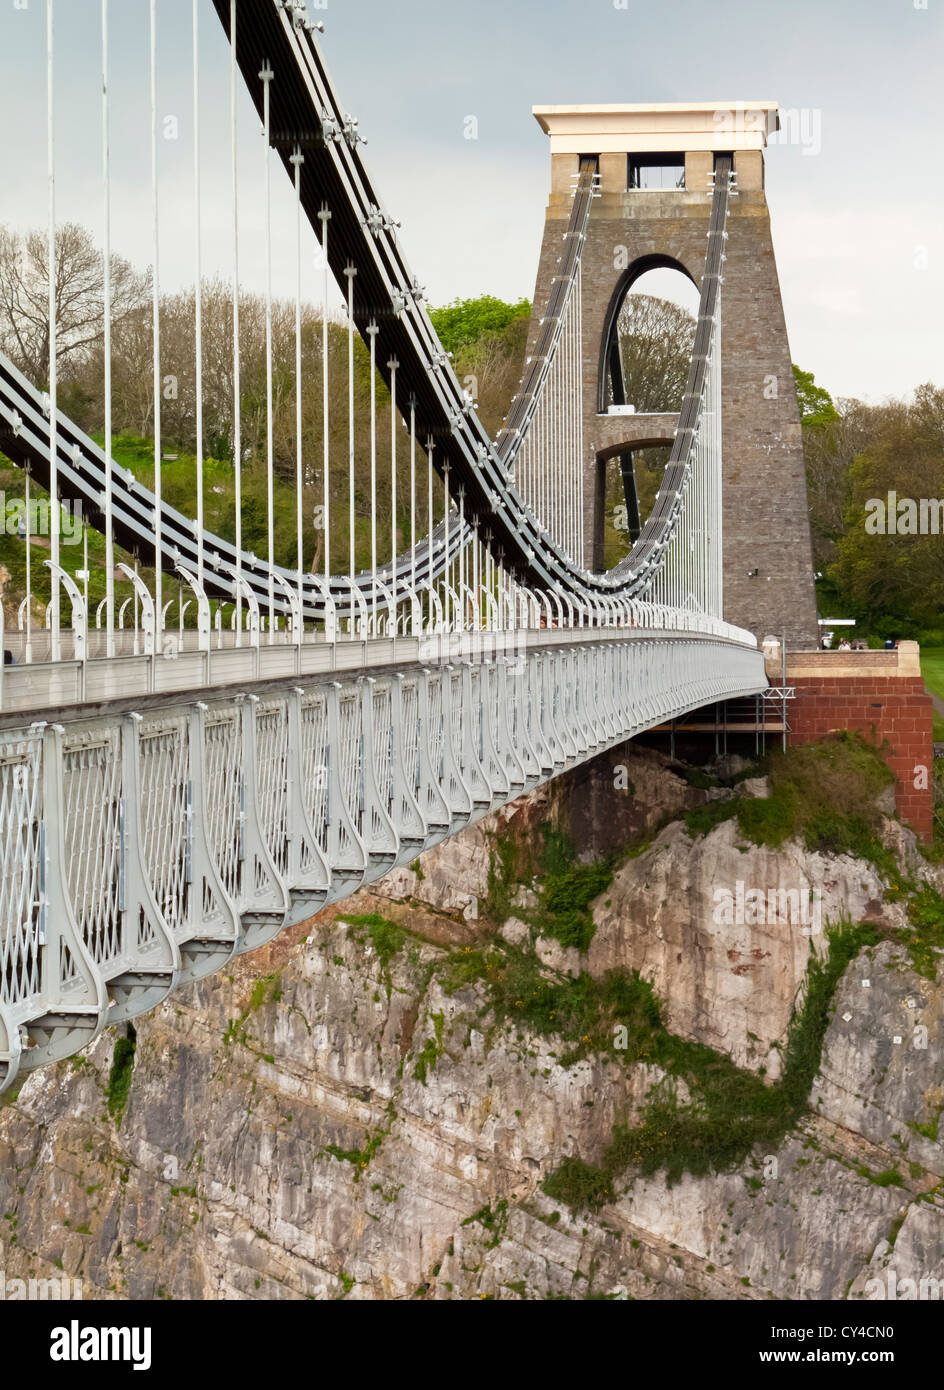 Clifton Suspension Bridge over the  River Avon Gorge in Bristol England UK designed by Isambard Kingdom Brunel and opened 1864 Stock Photo